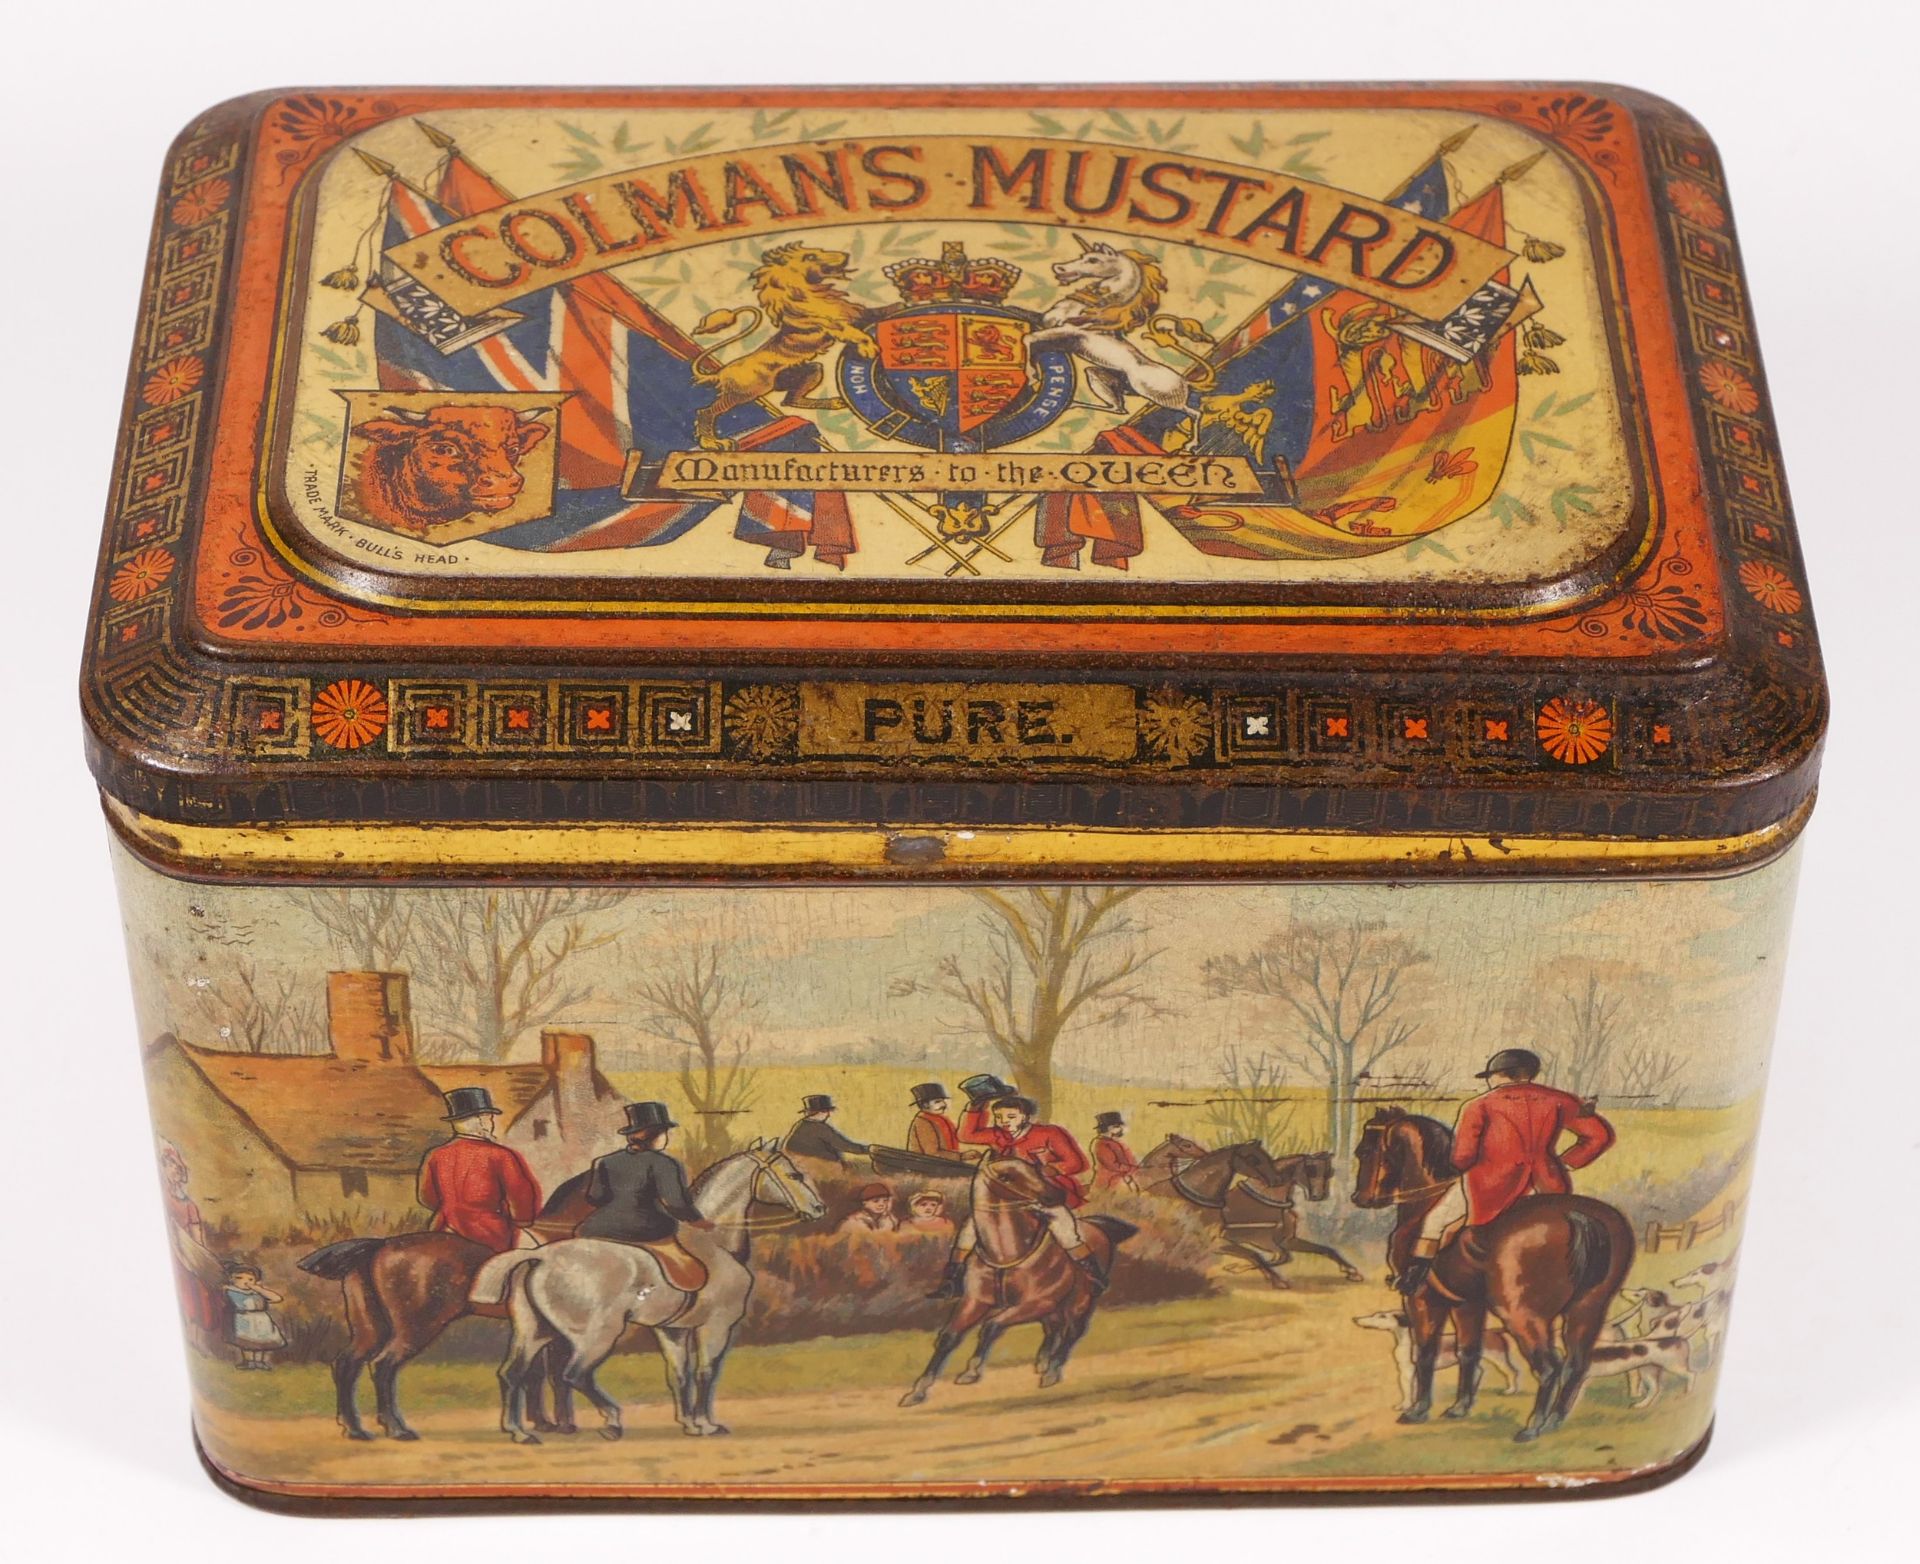 A Victorian Colman's Mustard storage tin, with hunting scene decoration, opening to reveal a inner - Image 2 of 3